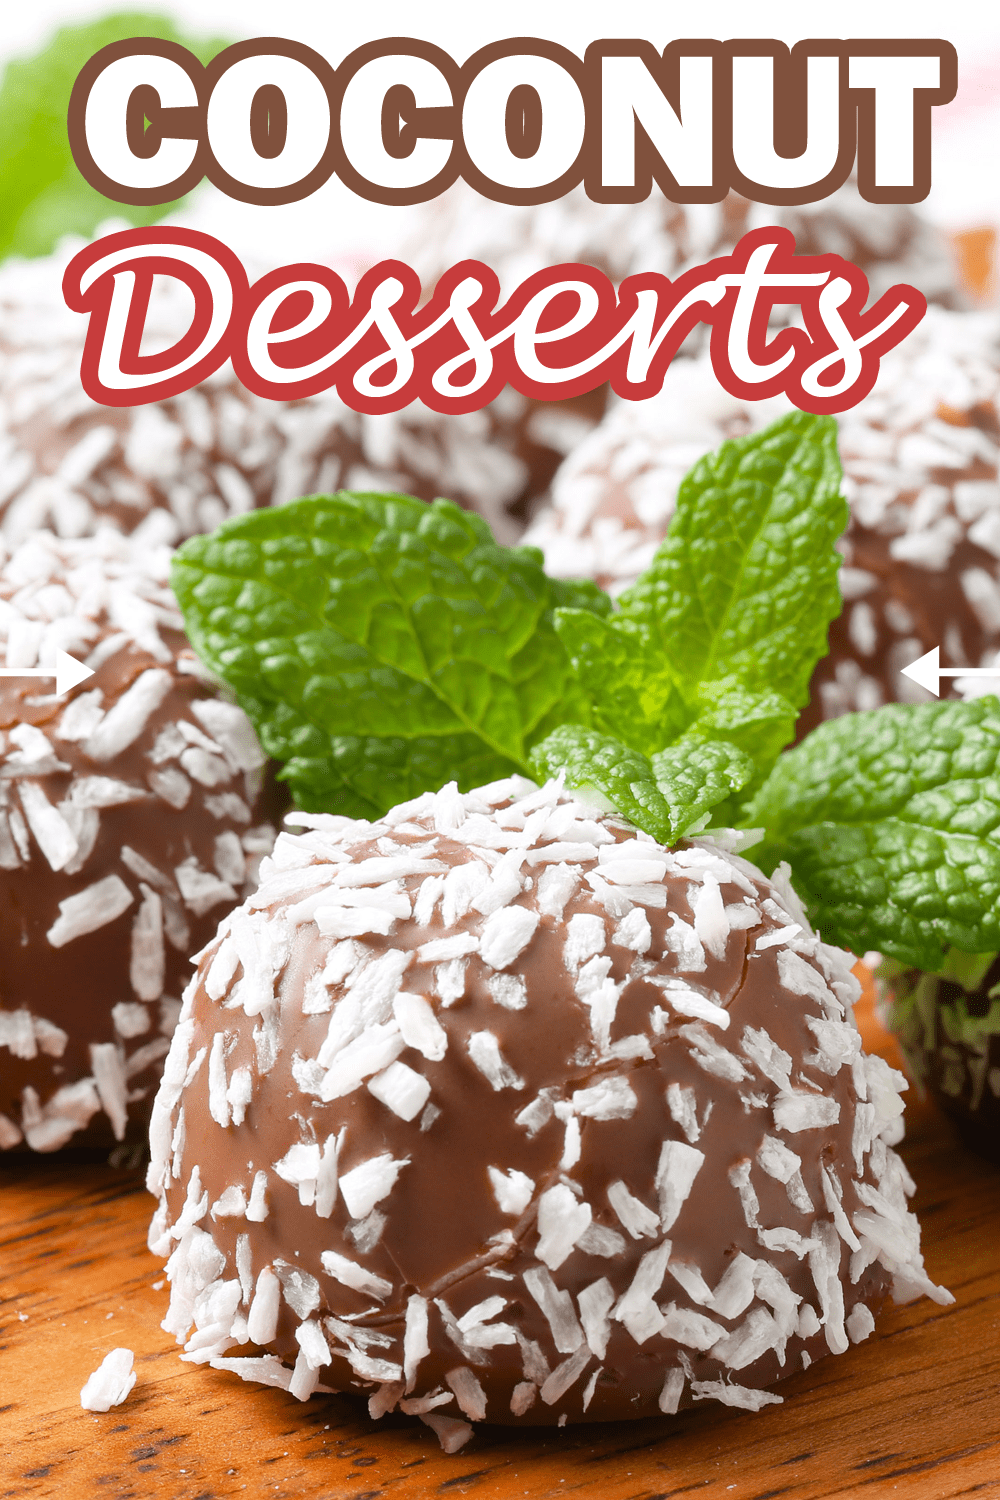 32 Best Coconut Desserts (+ Easy Recipes) - Insanely Good